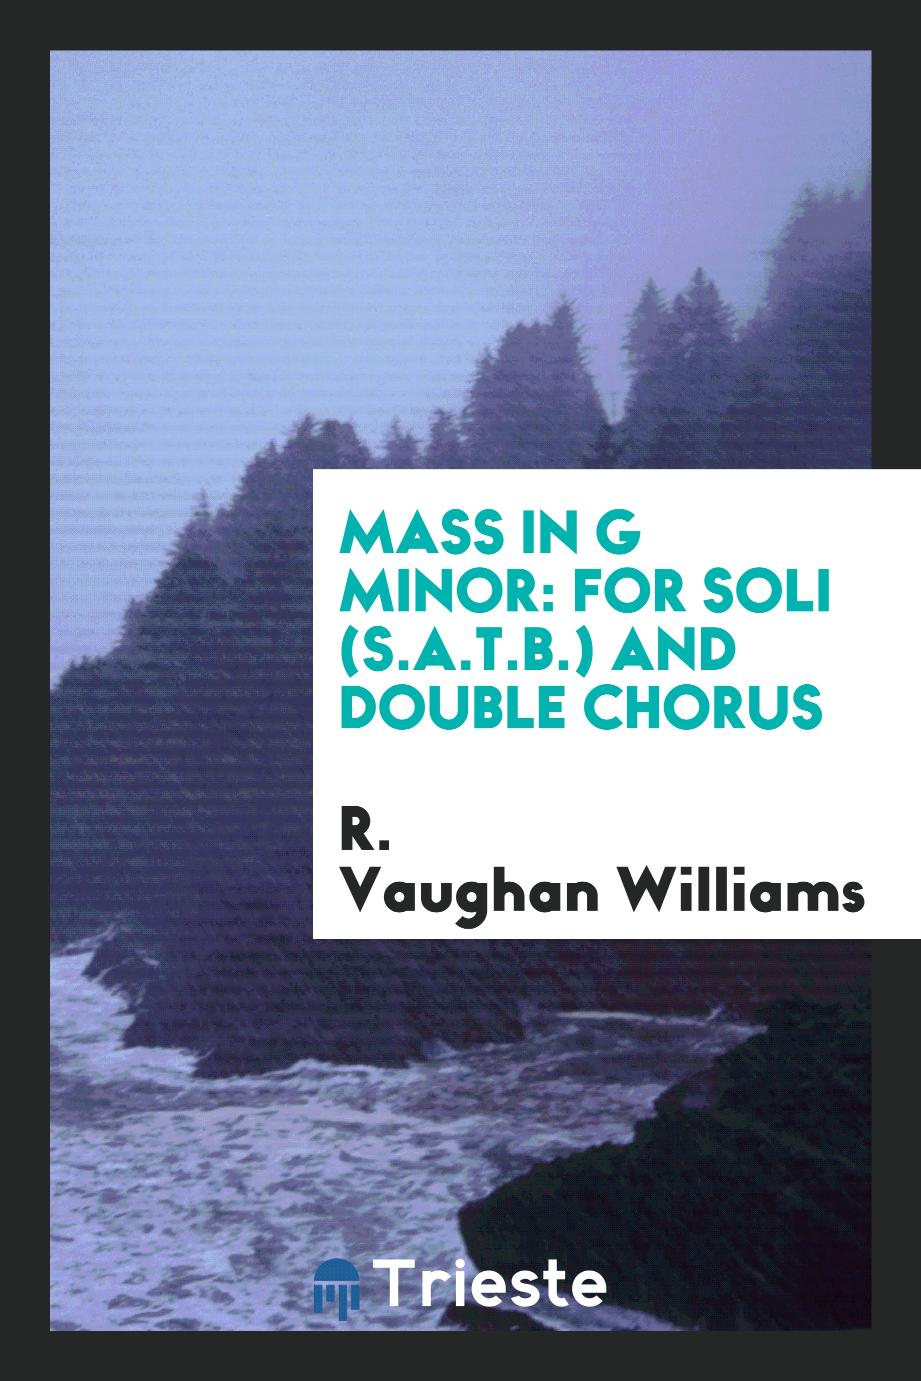 Mass in G minor: for soli (S.A.T.B.) and double chorus